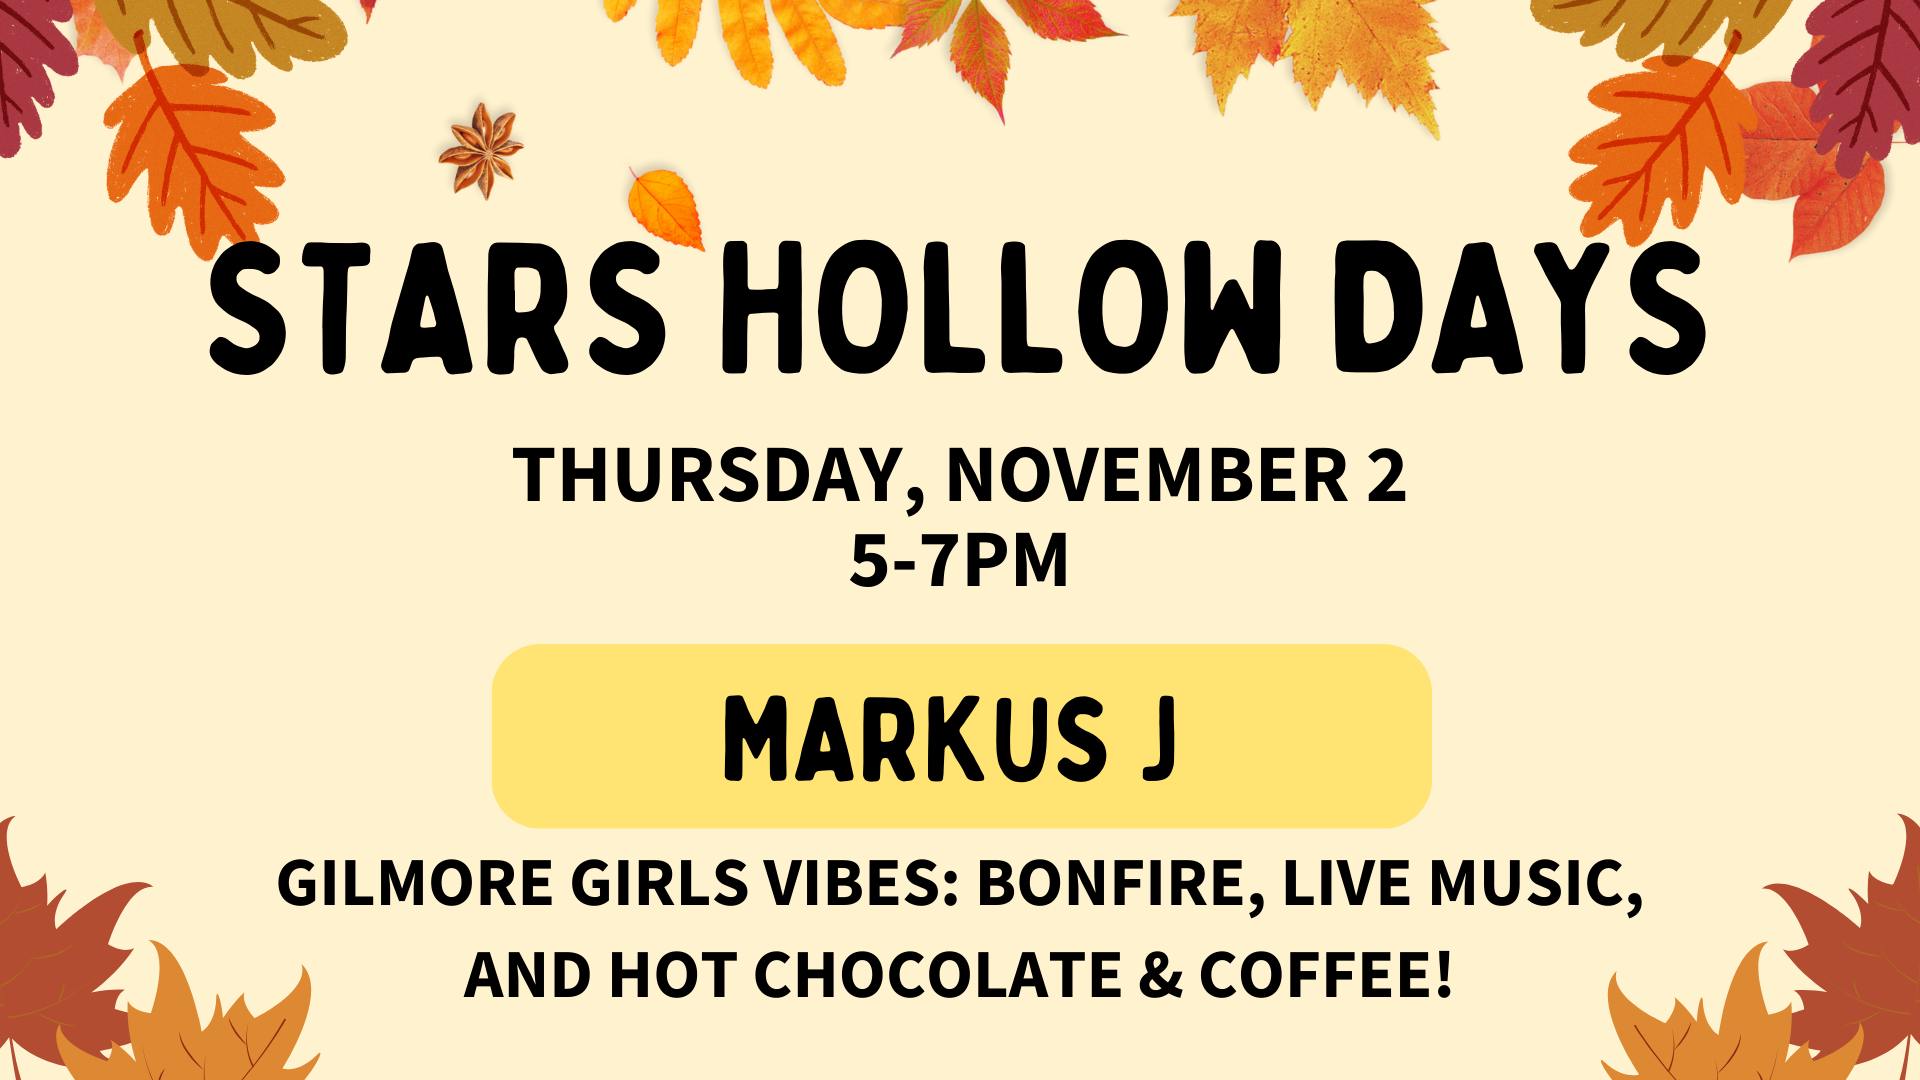 A poster for stars hollow days.